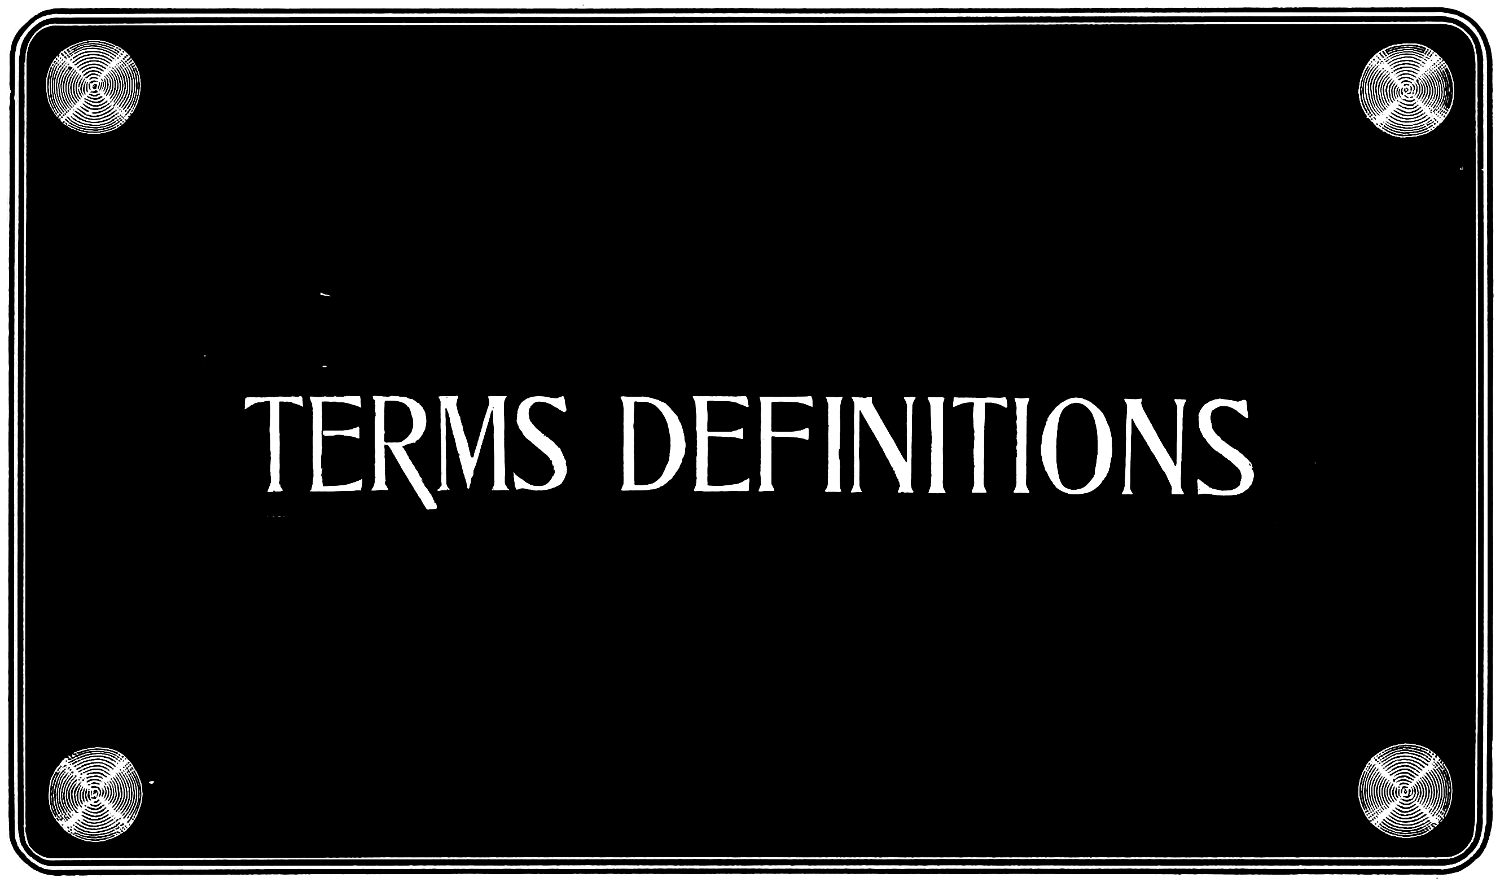 TERMS DEFINITIONS